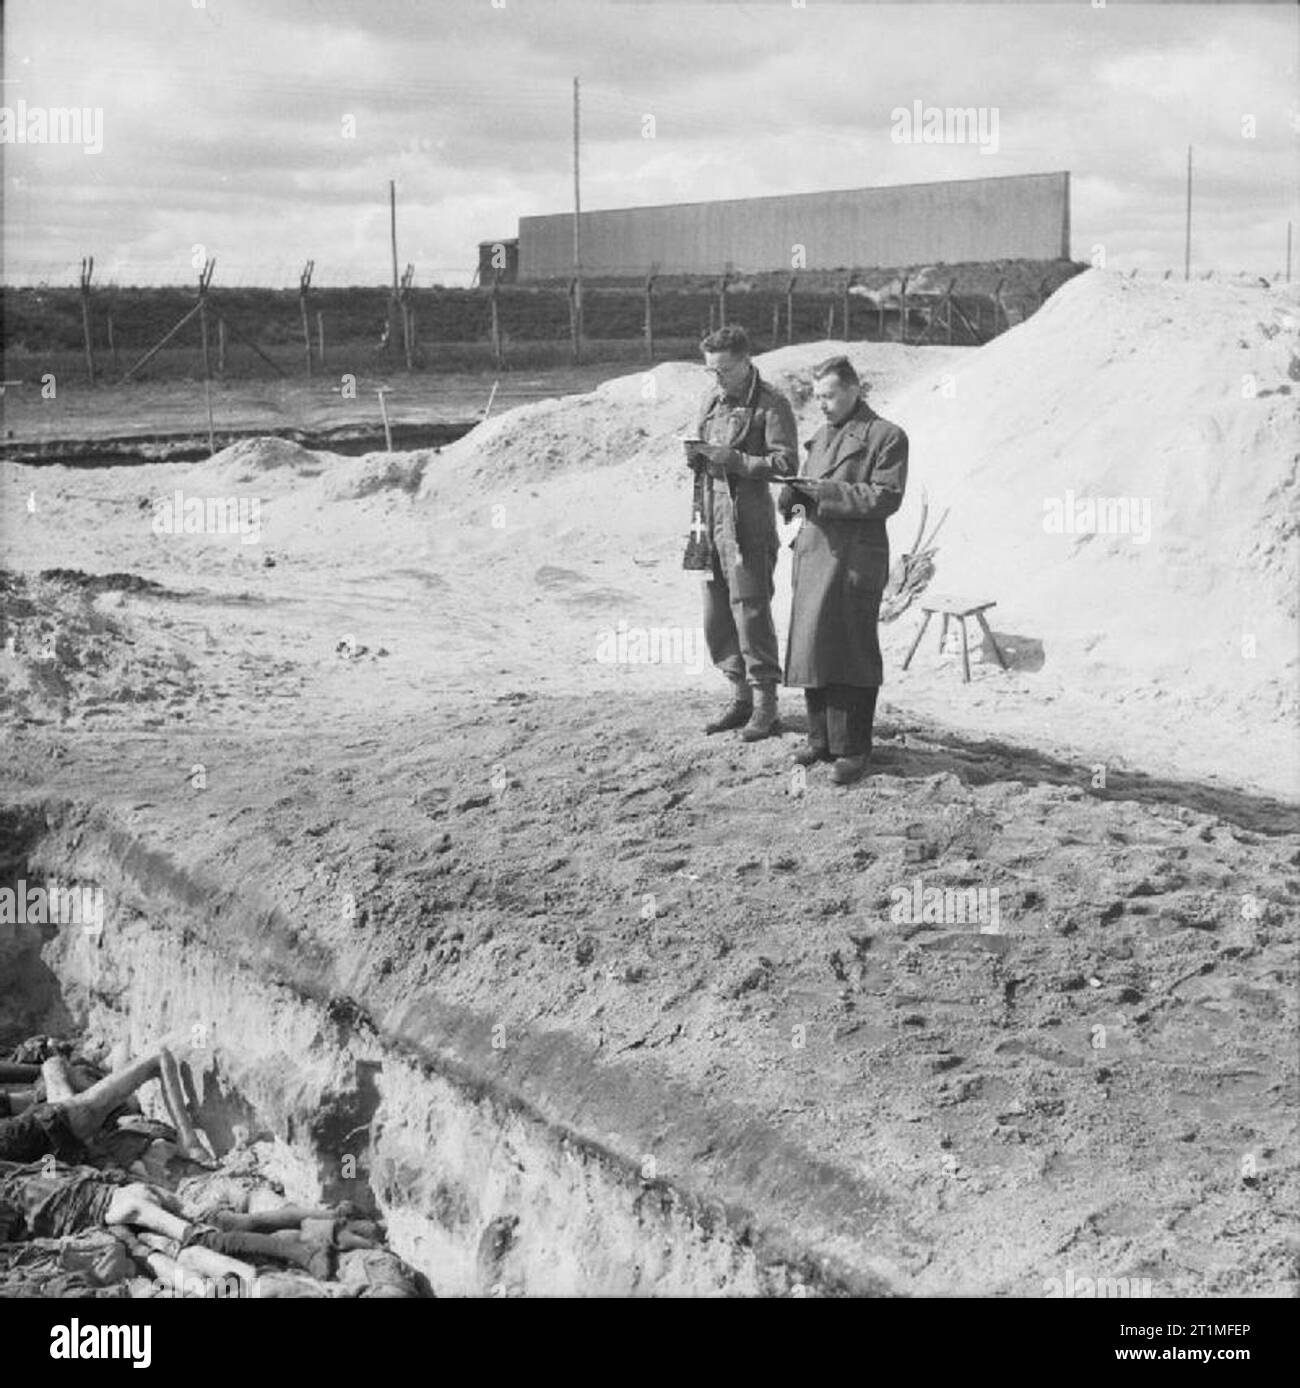 The Liberation of Bergen-belsen Concentration Camp, April 1945 Two British Army chaplains, Rev Leslie H Hardman, Senior Jewish Chaplain to the 2nd Army, and the Roman Catholic Padre Father M C Morrison, conduct a service over one of the mass graves before it is filled in. Stock Photo